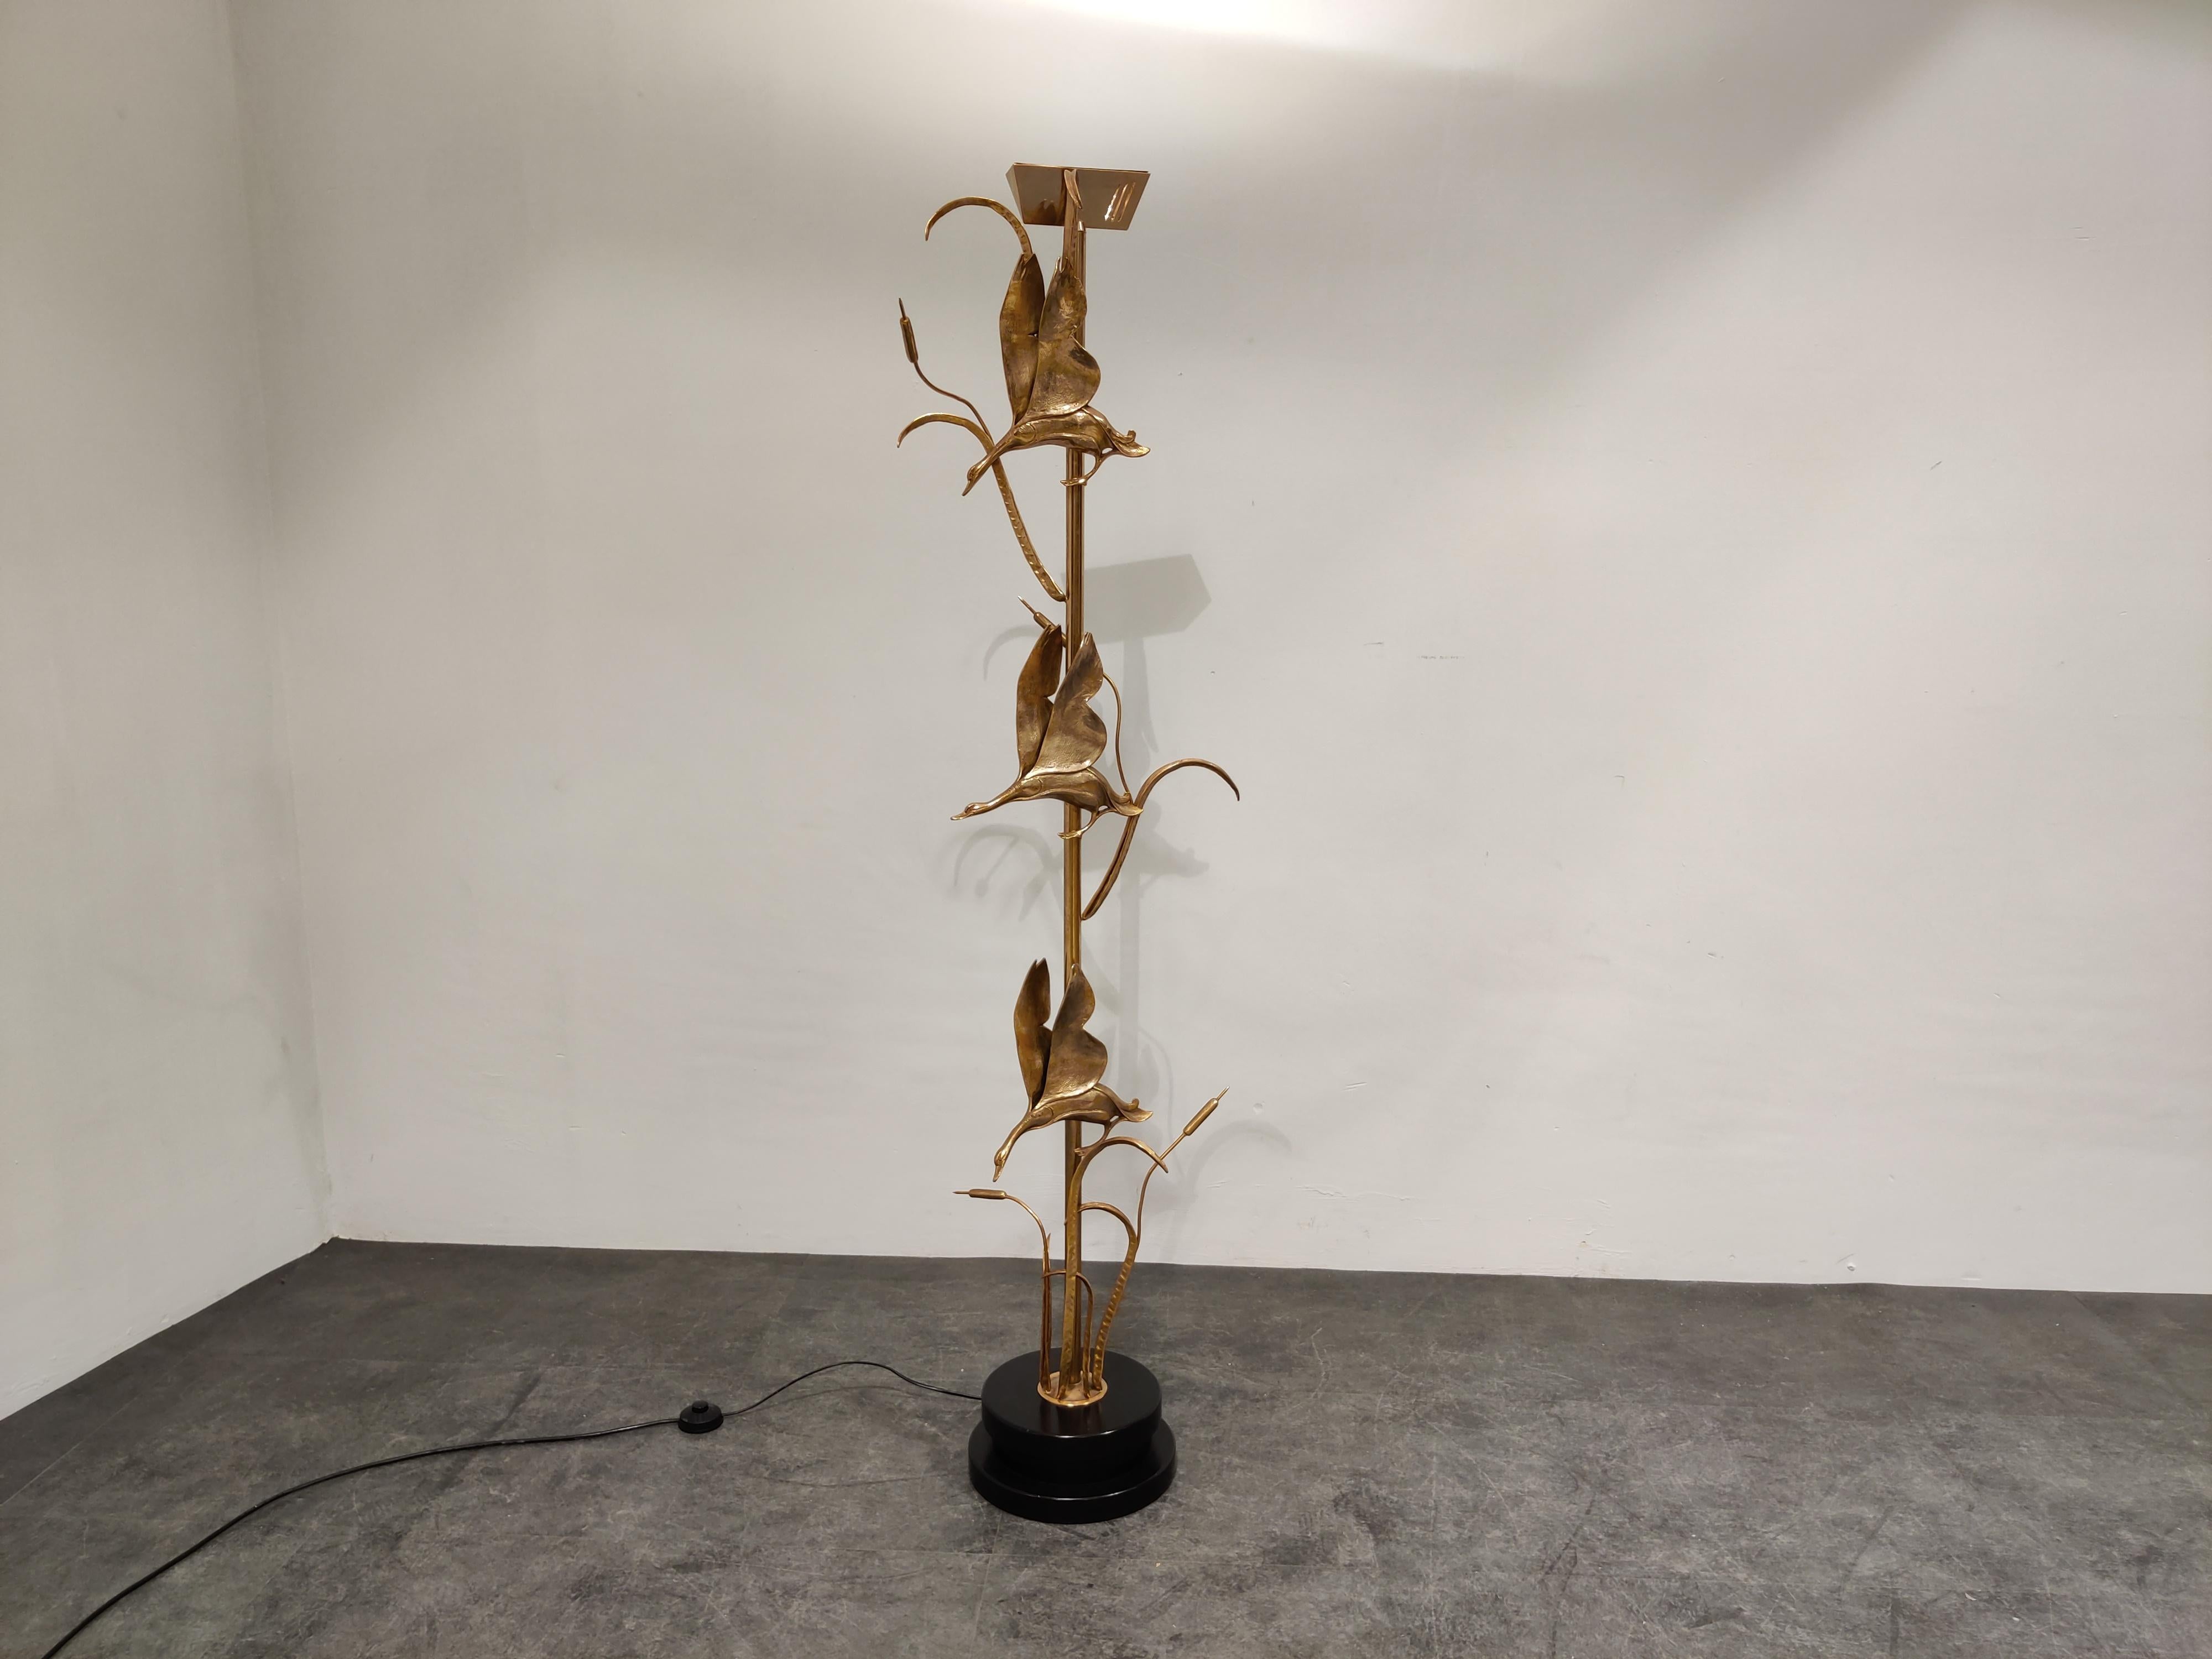 Rare and beautiful floor lamp designed by Lanciotto Galeotti for l'Originale.

The lamp depicts flying herons in a natural setting.

High quality brass and a round black wooden base. 

A real eyecatcher.

tested and ready to use.

1970s,